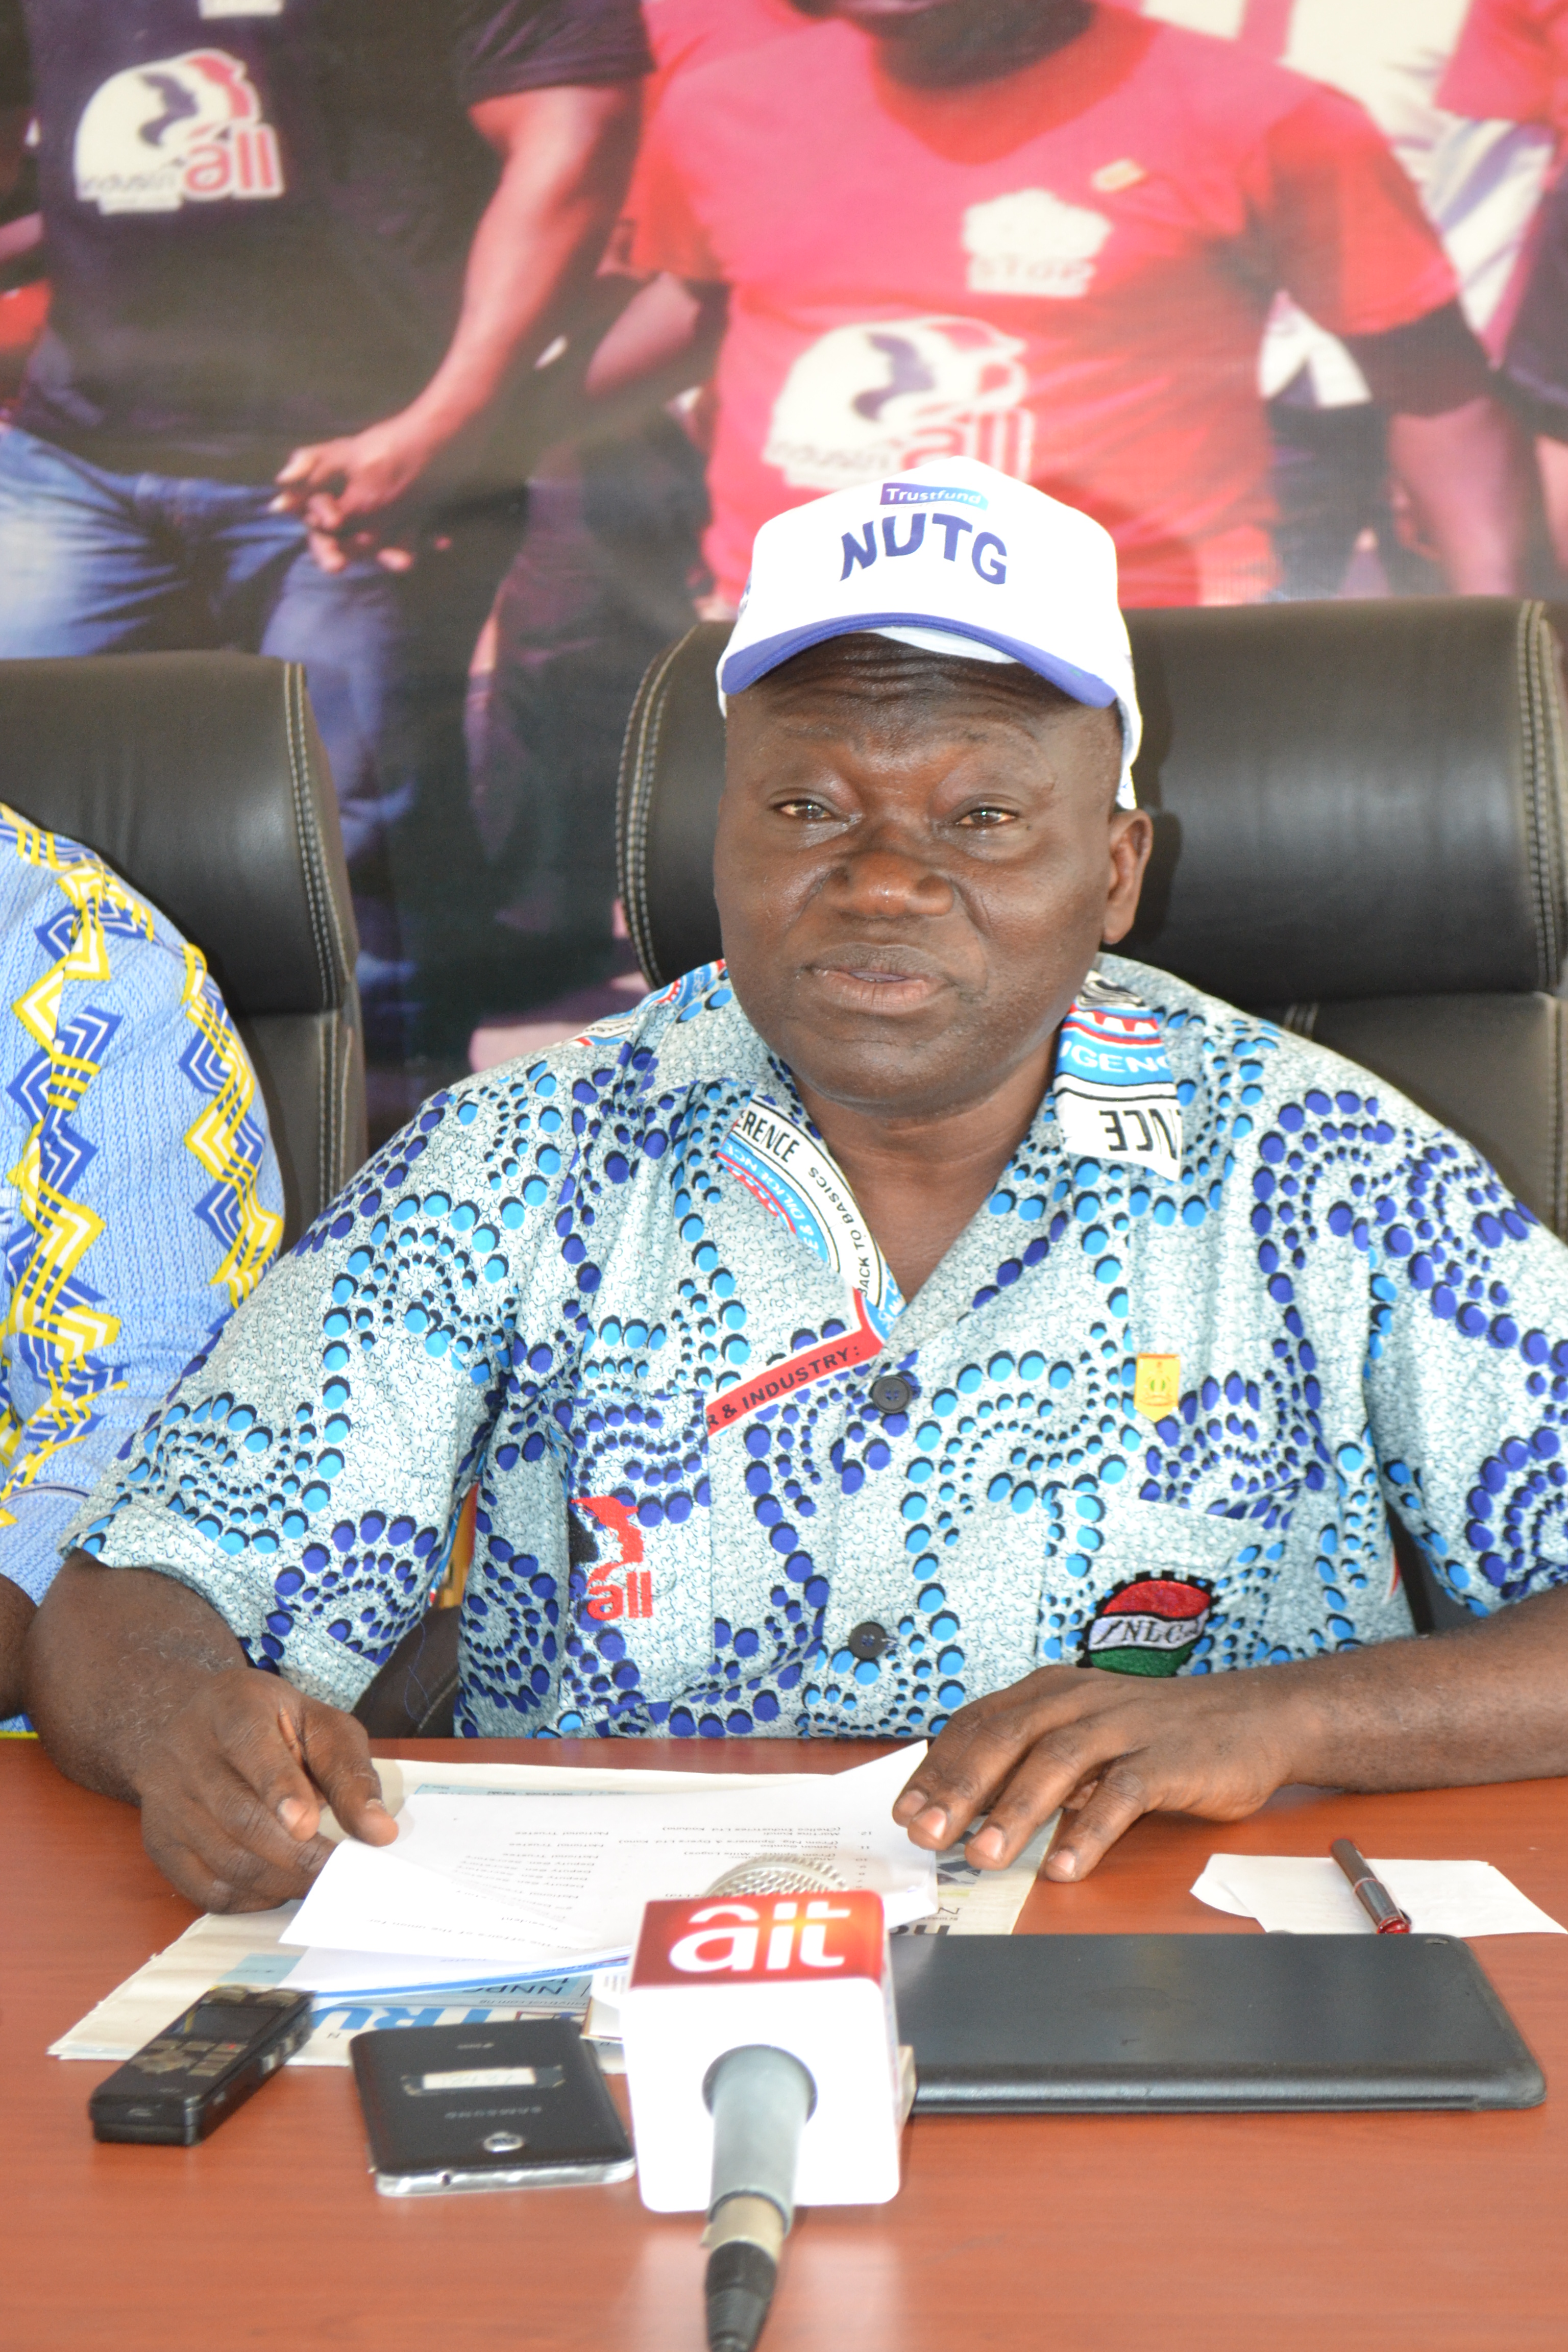 TEXT OF PRESS CONFERENCE BY NATIONAL UNION OF TEXTILE GARMENT AND TAILORING WORKERS OF NIGERIA (NUTGTWN)